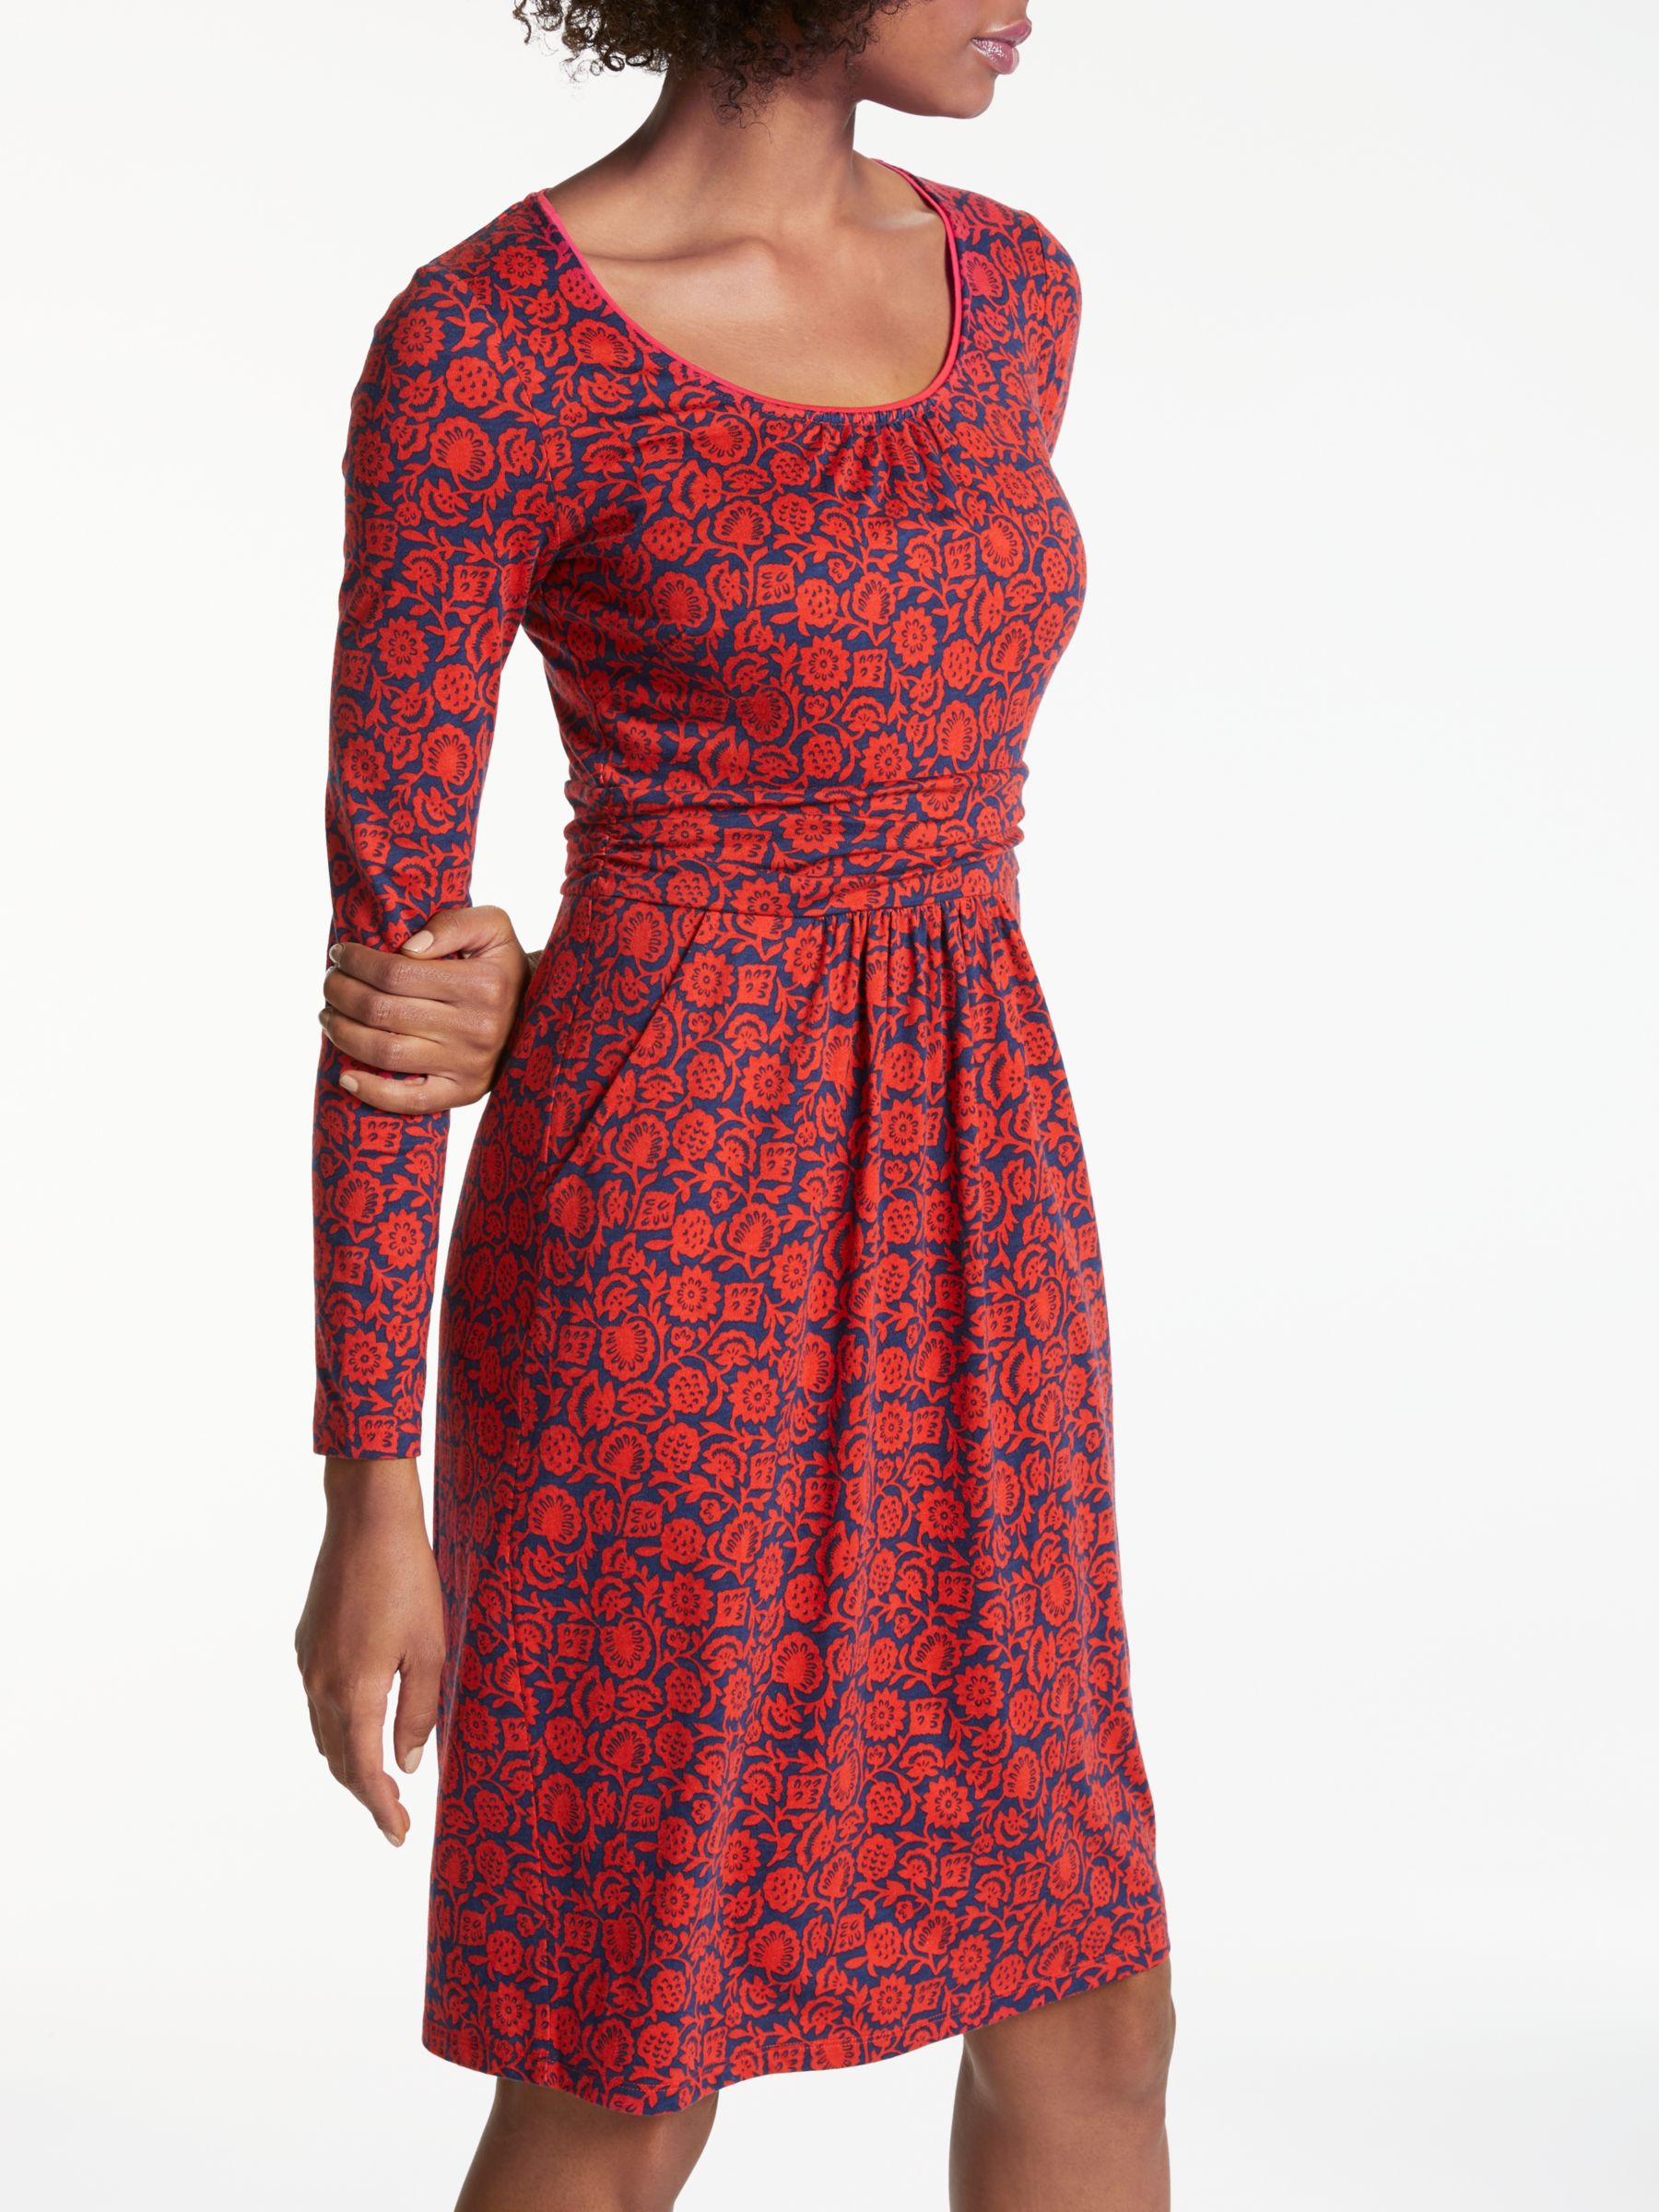 Boden Mabel Jersey Dress, Post Box Red 